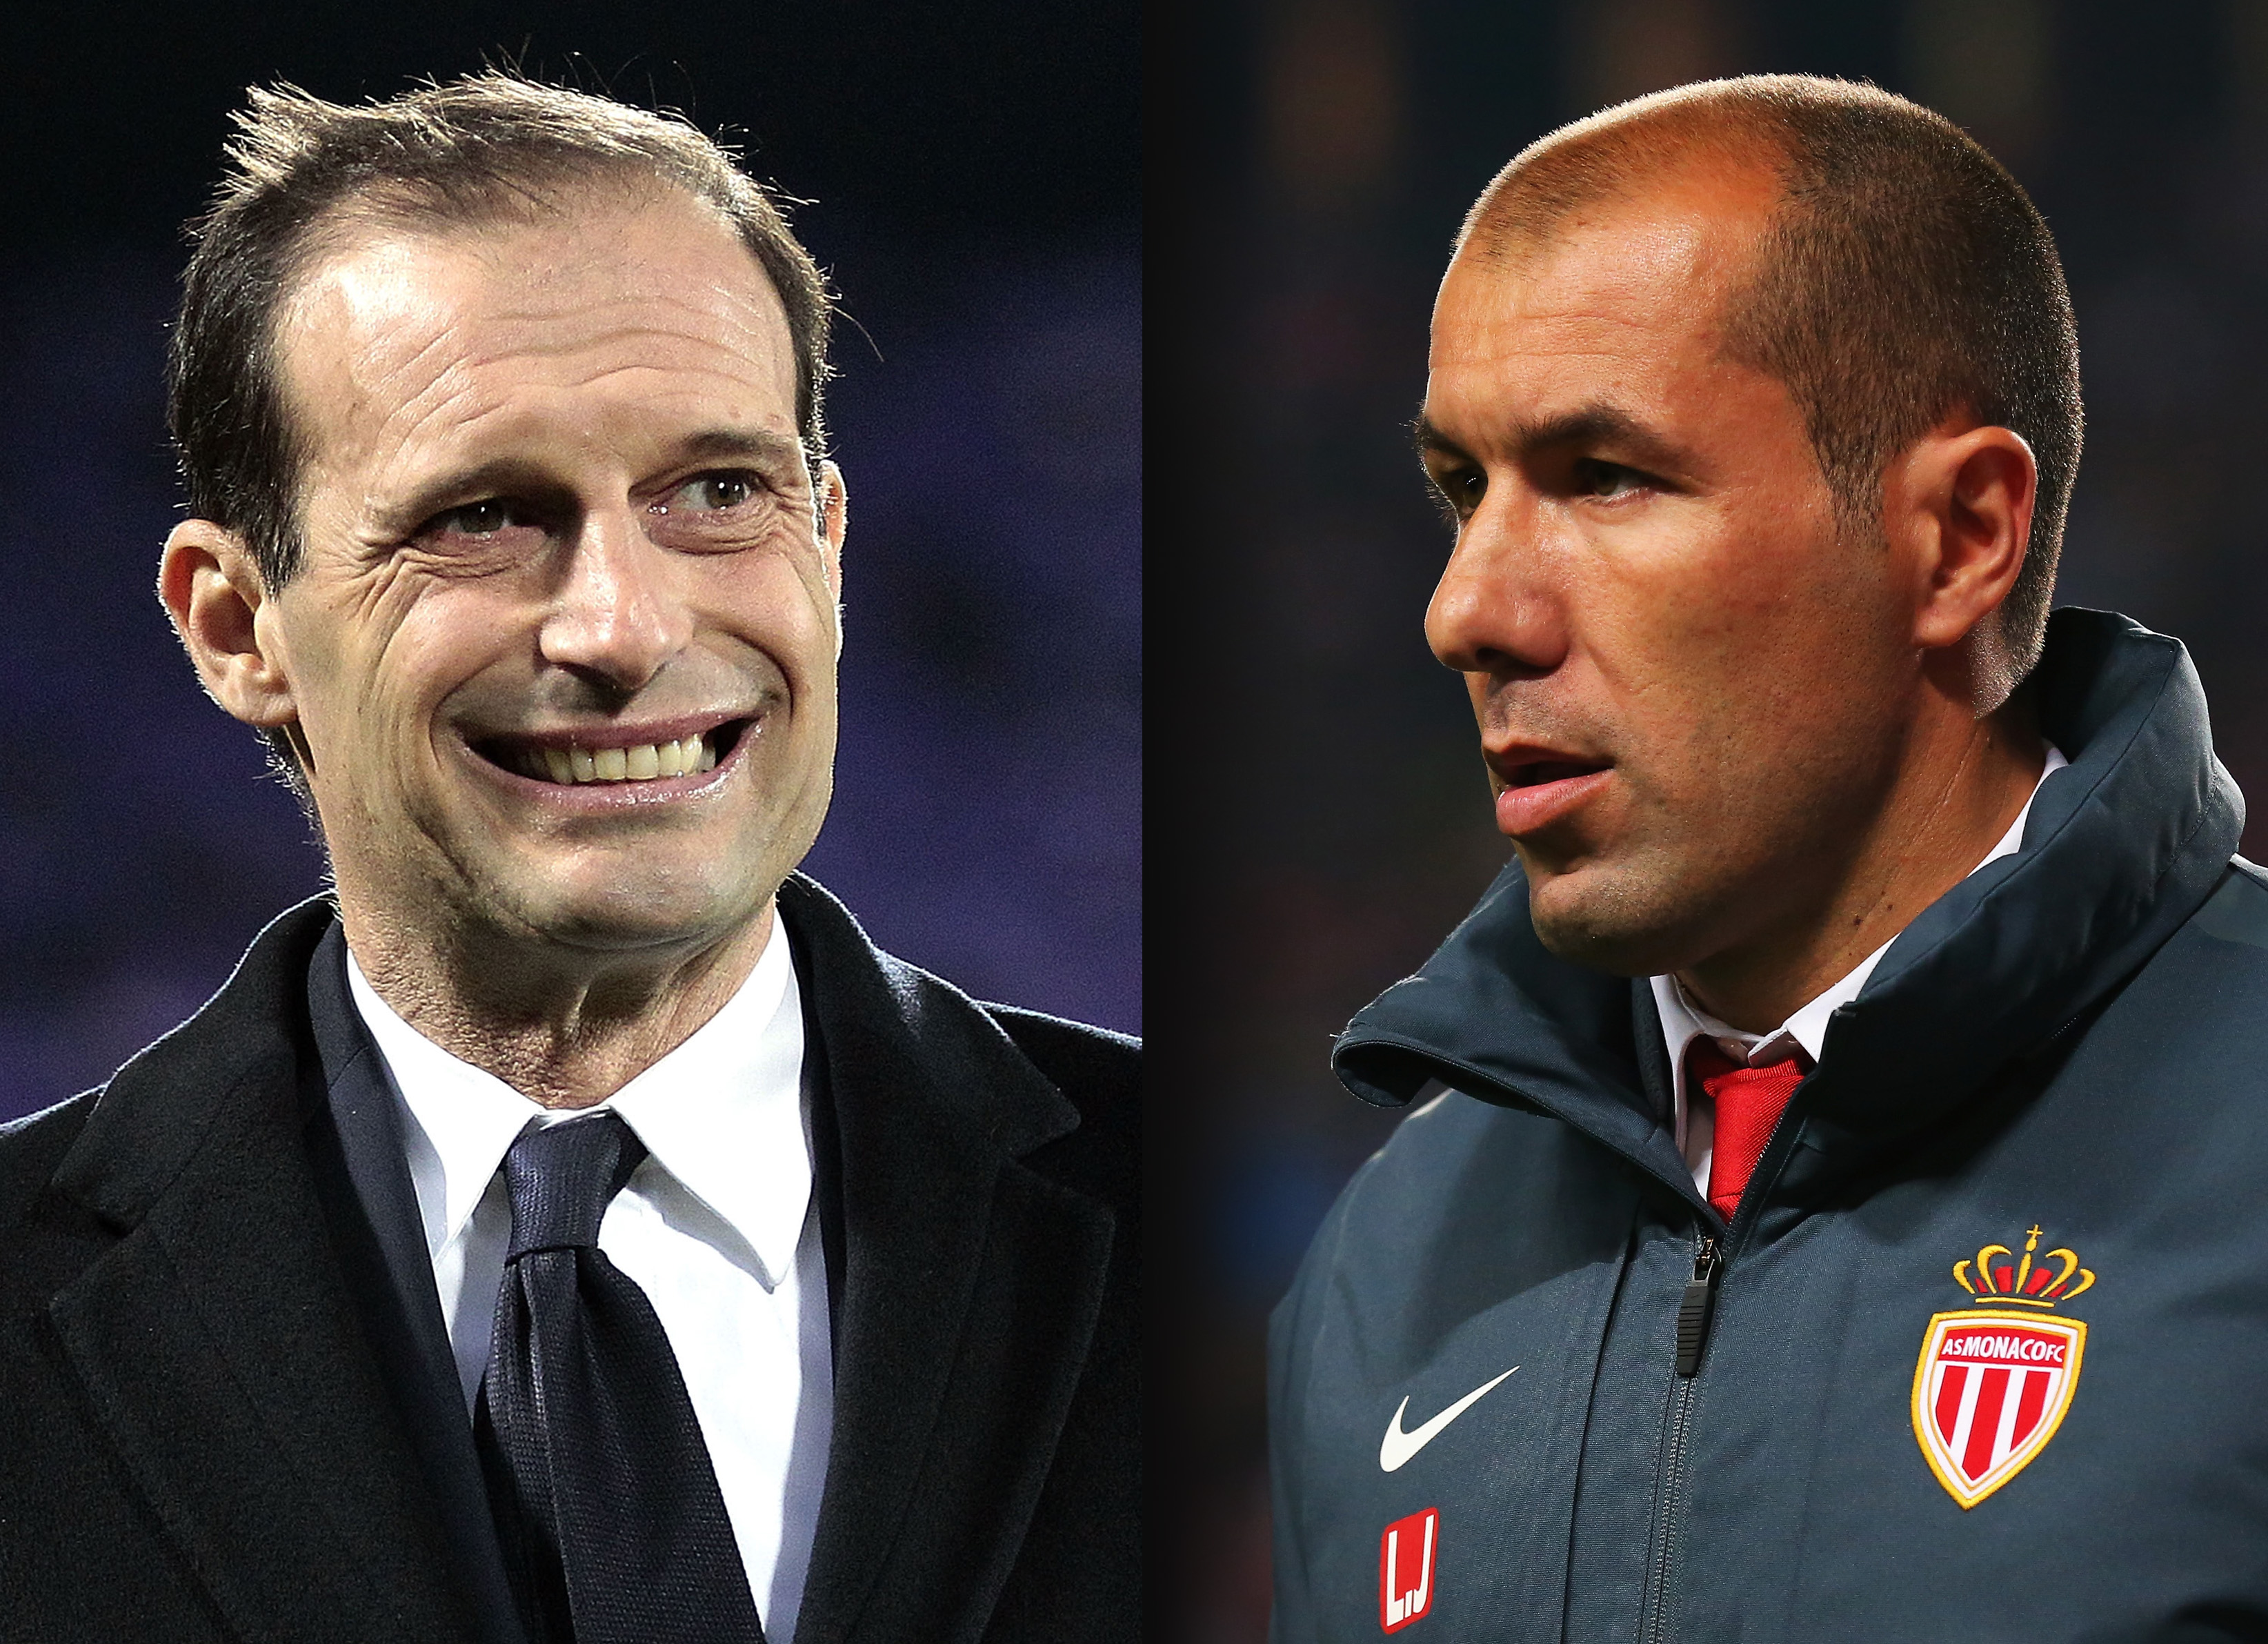 FILE PHOTO (EDITORS NOTE: COMPOSITE OF TWO IMAGES - Image numbers (L) 631764068 and 470720084) In this composite image a comparision has been made between Massimiliano Allegri head coach of Juventus FC and Leonardo Jardim, coach of Monaco.  AS Monaco and Juventus meet in one of the UEFA Champions League Semi Finals.  ***LEFT IMAGE*** FLORENCE, ITALY - JANUARY 15: Massimiliano Allegri head coach of Juventus FC reacts during the Serie A match between ACF Fiorentina and Juventus FC at Stadio Artemio Franchi on January 15, 2017 in Florence, Italy. (Photo by Gabriele Maltinti/Getty Images) ***RIGHT IMAGE*** MONACO - APRIL 22: Leonardo Jardim, coach of Monaco looks on after the UEFA Champions League quarter-final second leg match between AS Monaco FC and Juventus at Stade Louis II on April 22, 2015 in Monaco, Monaco. (Photo by Alex Livesey/Getty Images)